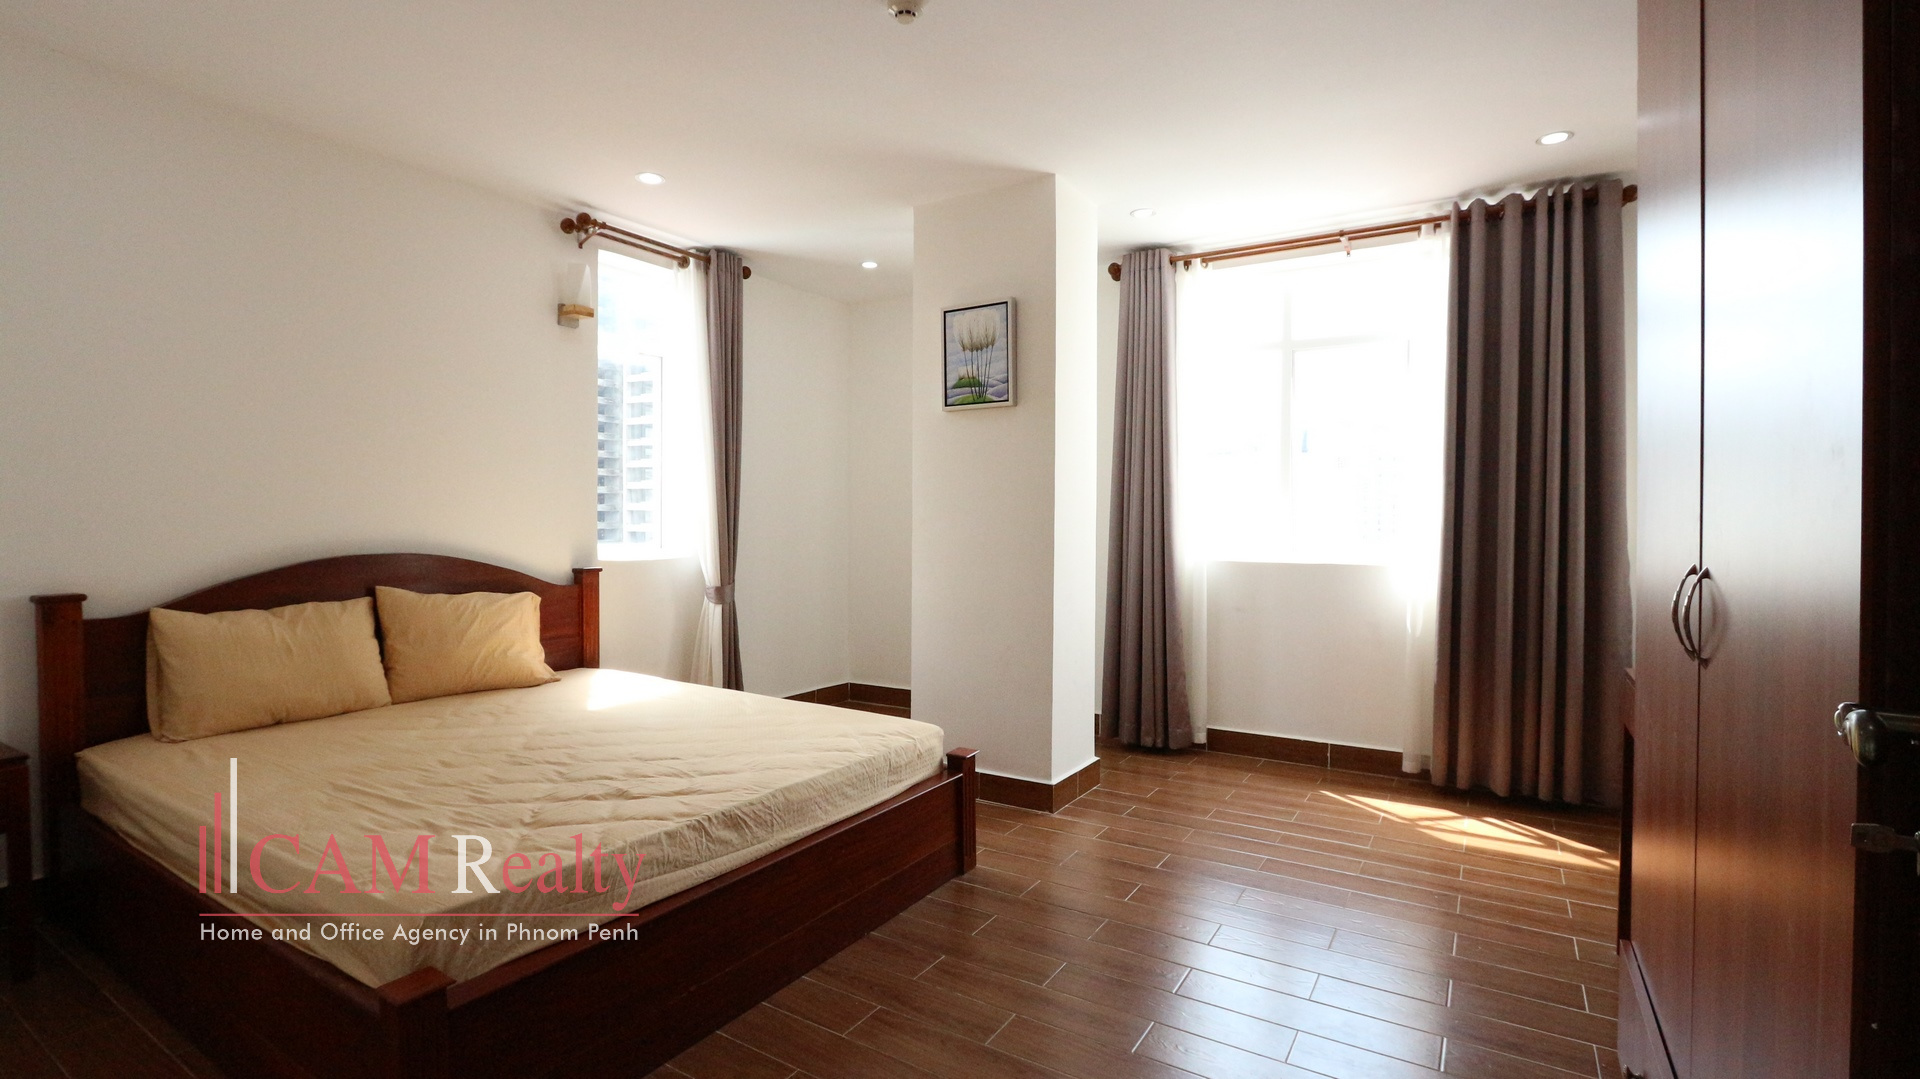 Russian Market area | Modern style 1 bedroom apartment for rent in Phnom Penh